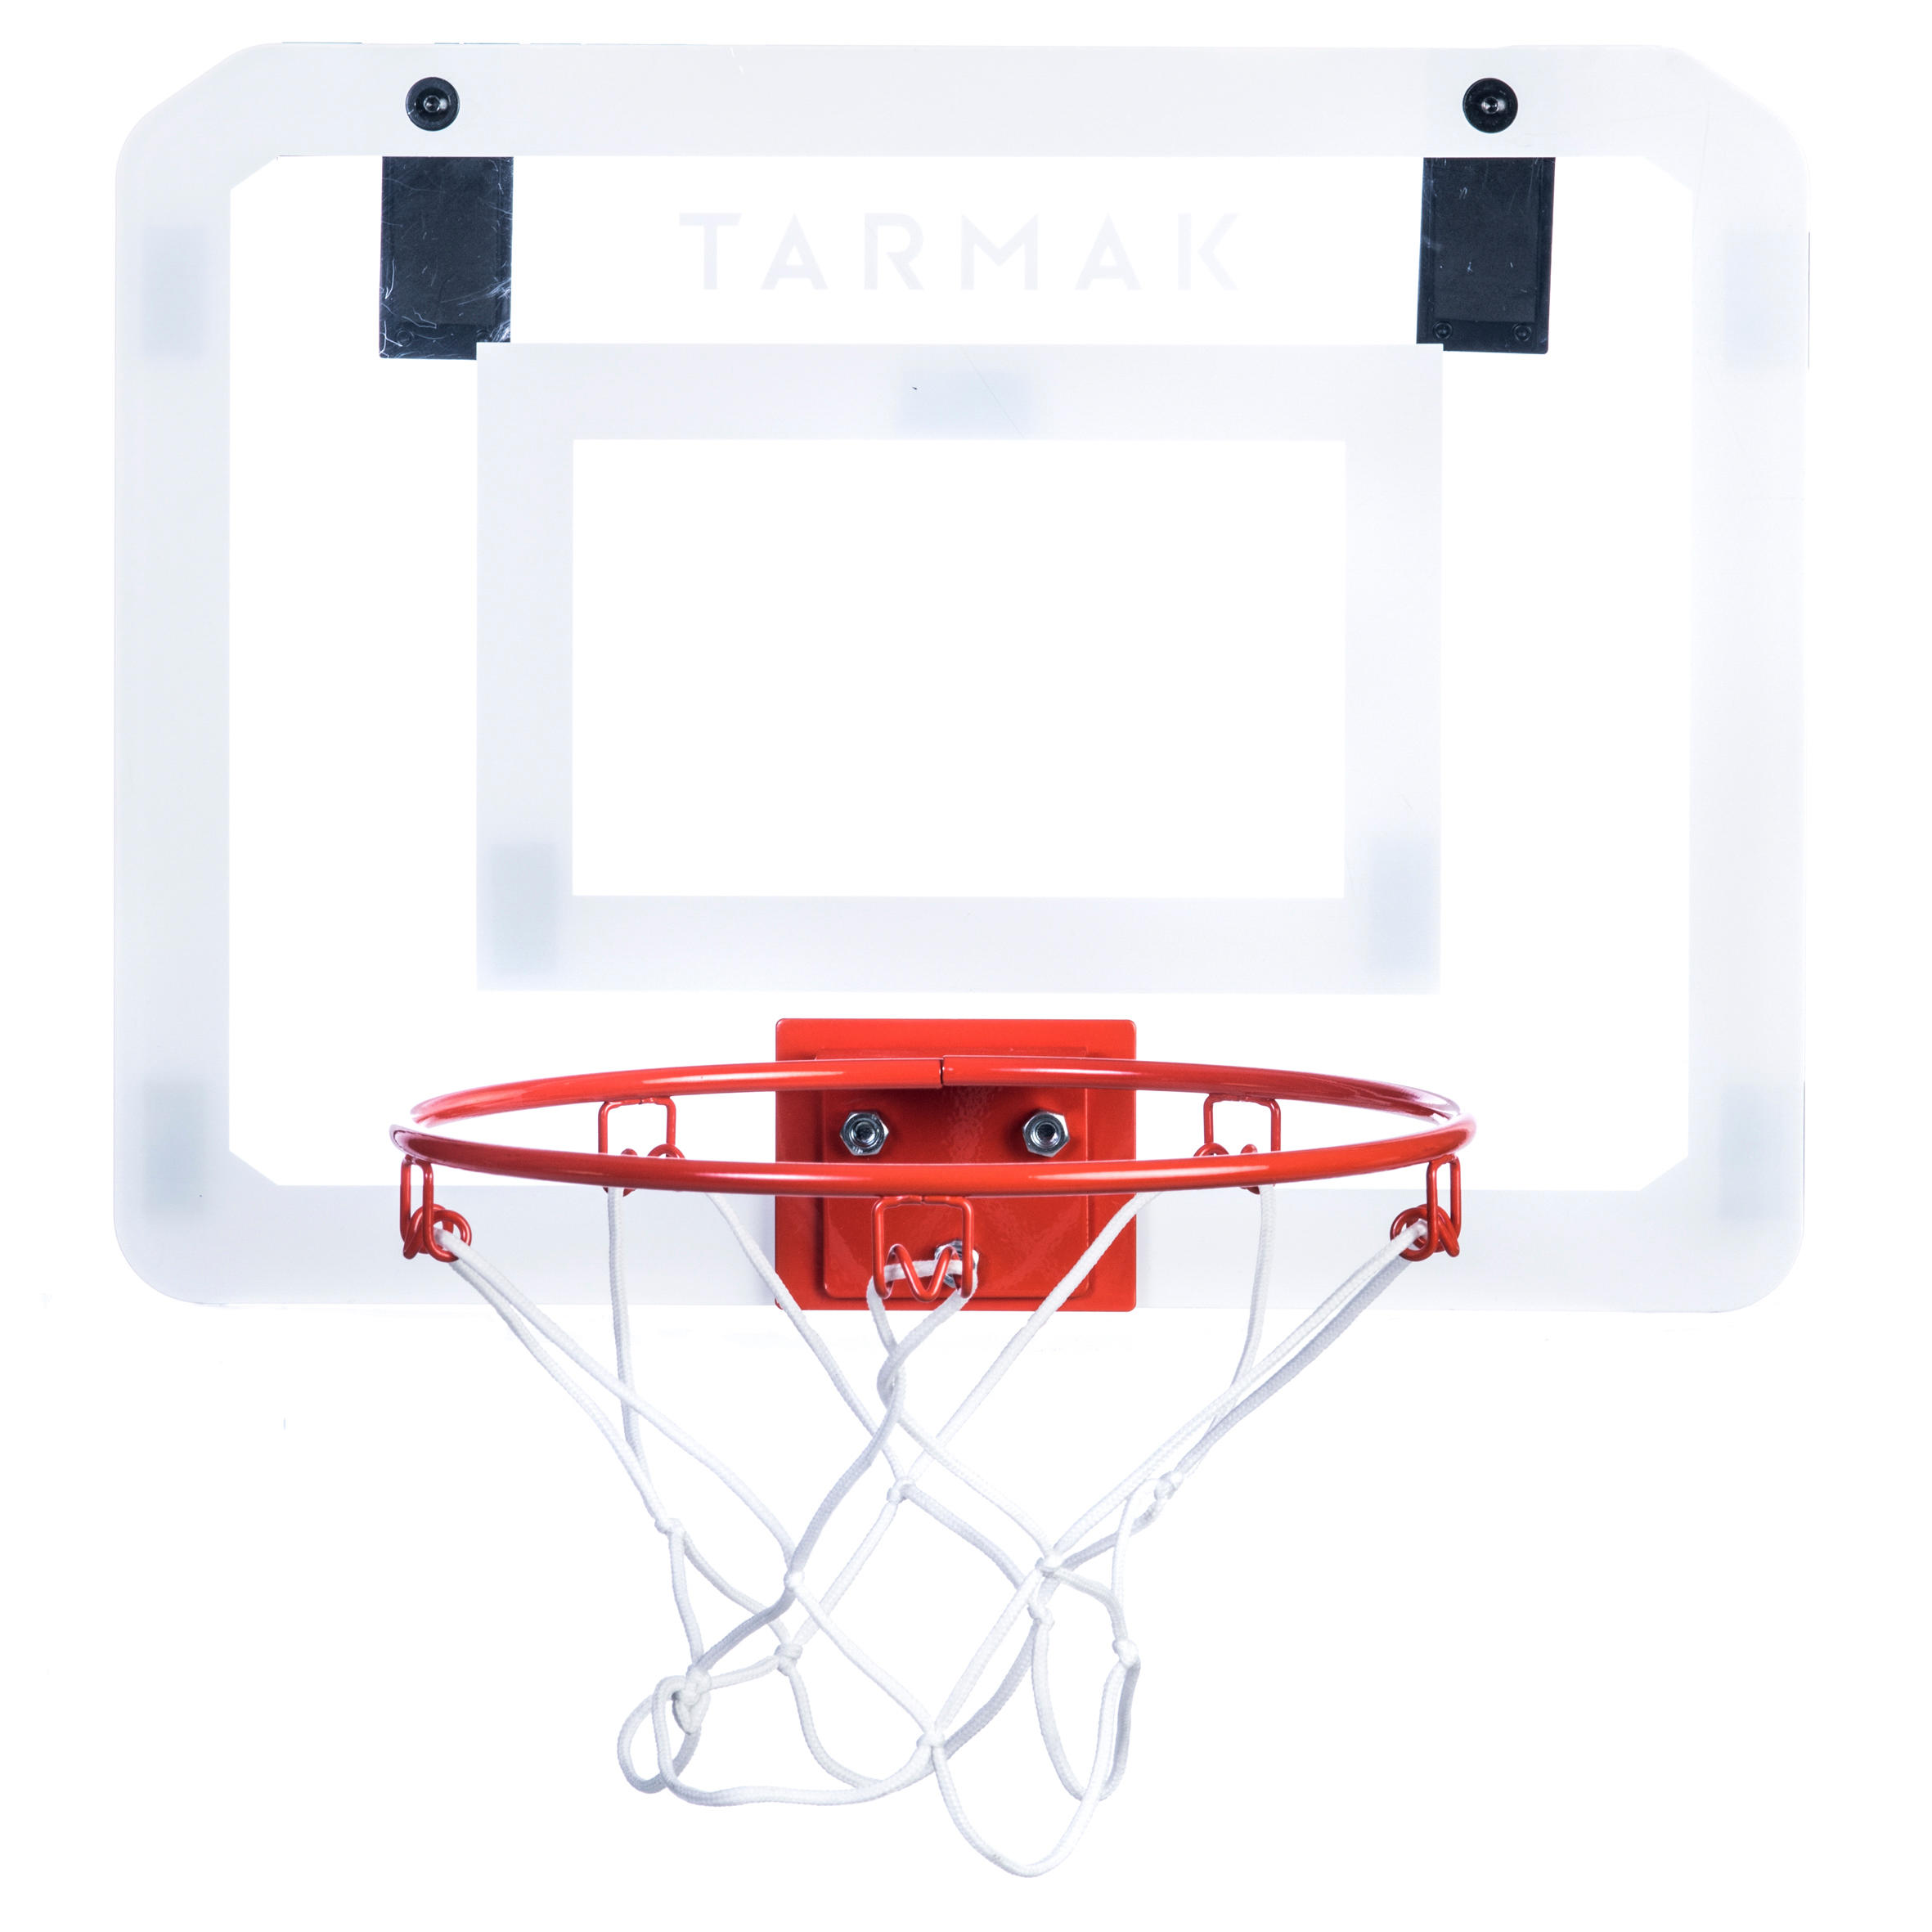 Buy Vinex Basketball Flex Rings Online at Lowest Price in India